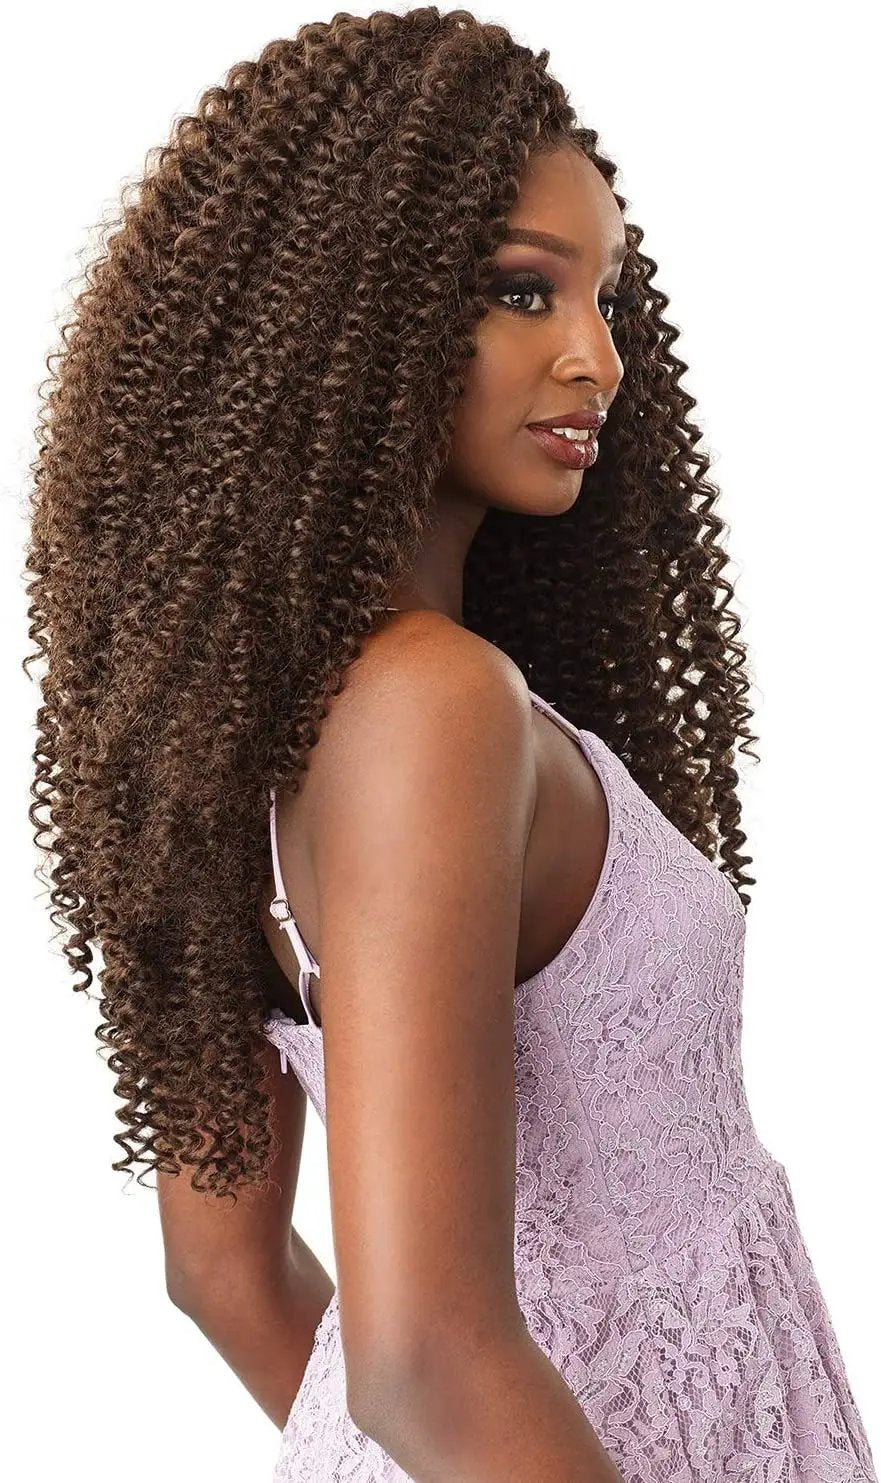 An image of the side of a girl with curly hair